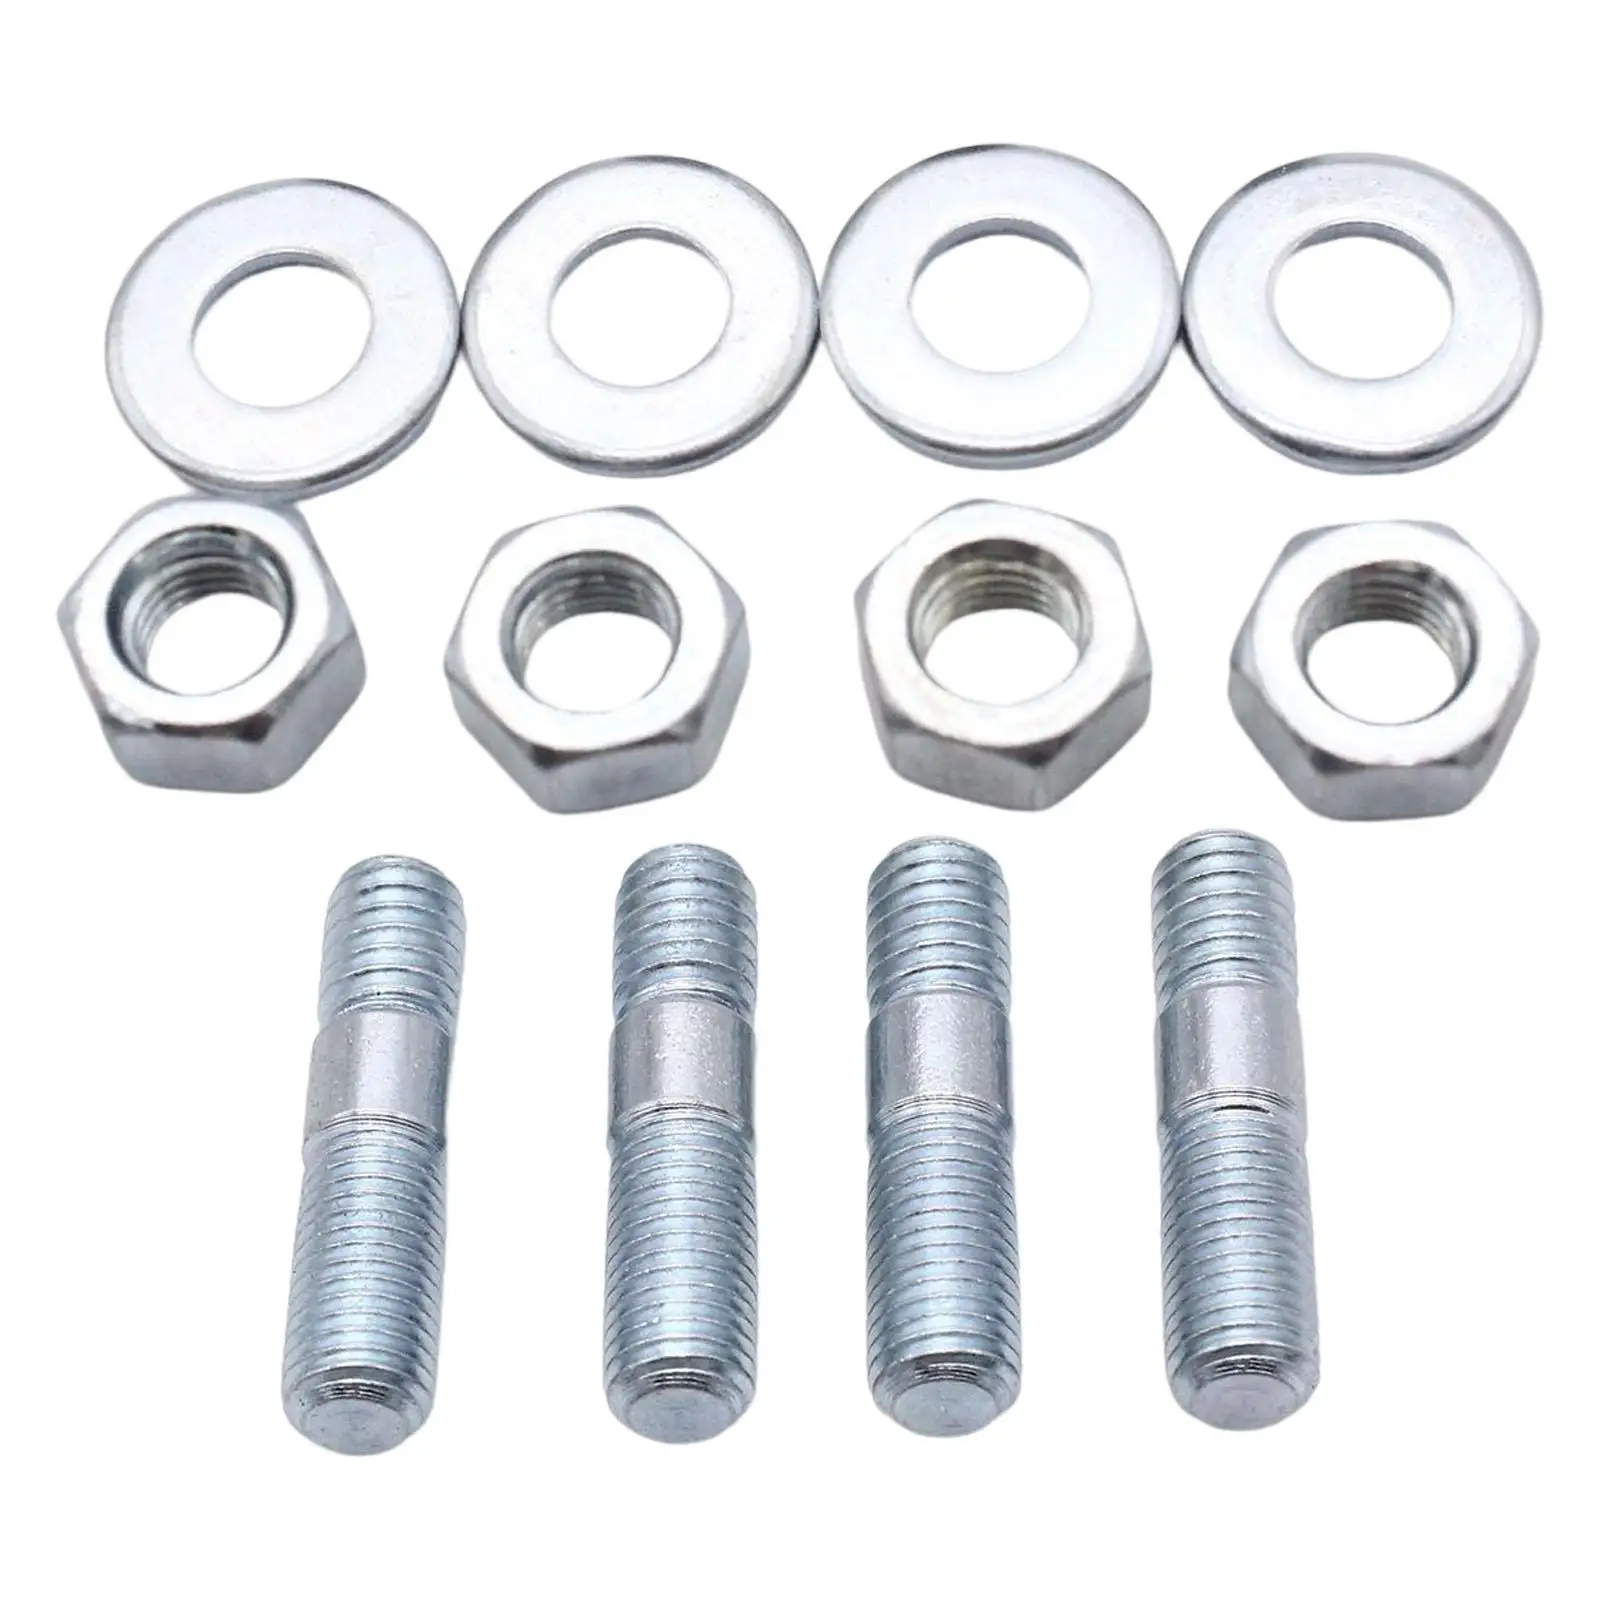 Carburetor Stud Kit 1 3/8 inch Carb Studs Kit Metal Carb Spacer Stud Kit Fit for Vehicle Parts Easy to Install Replace